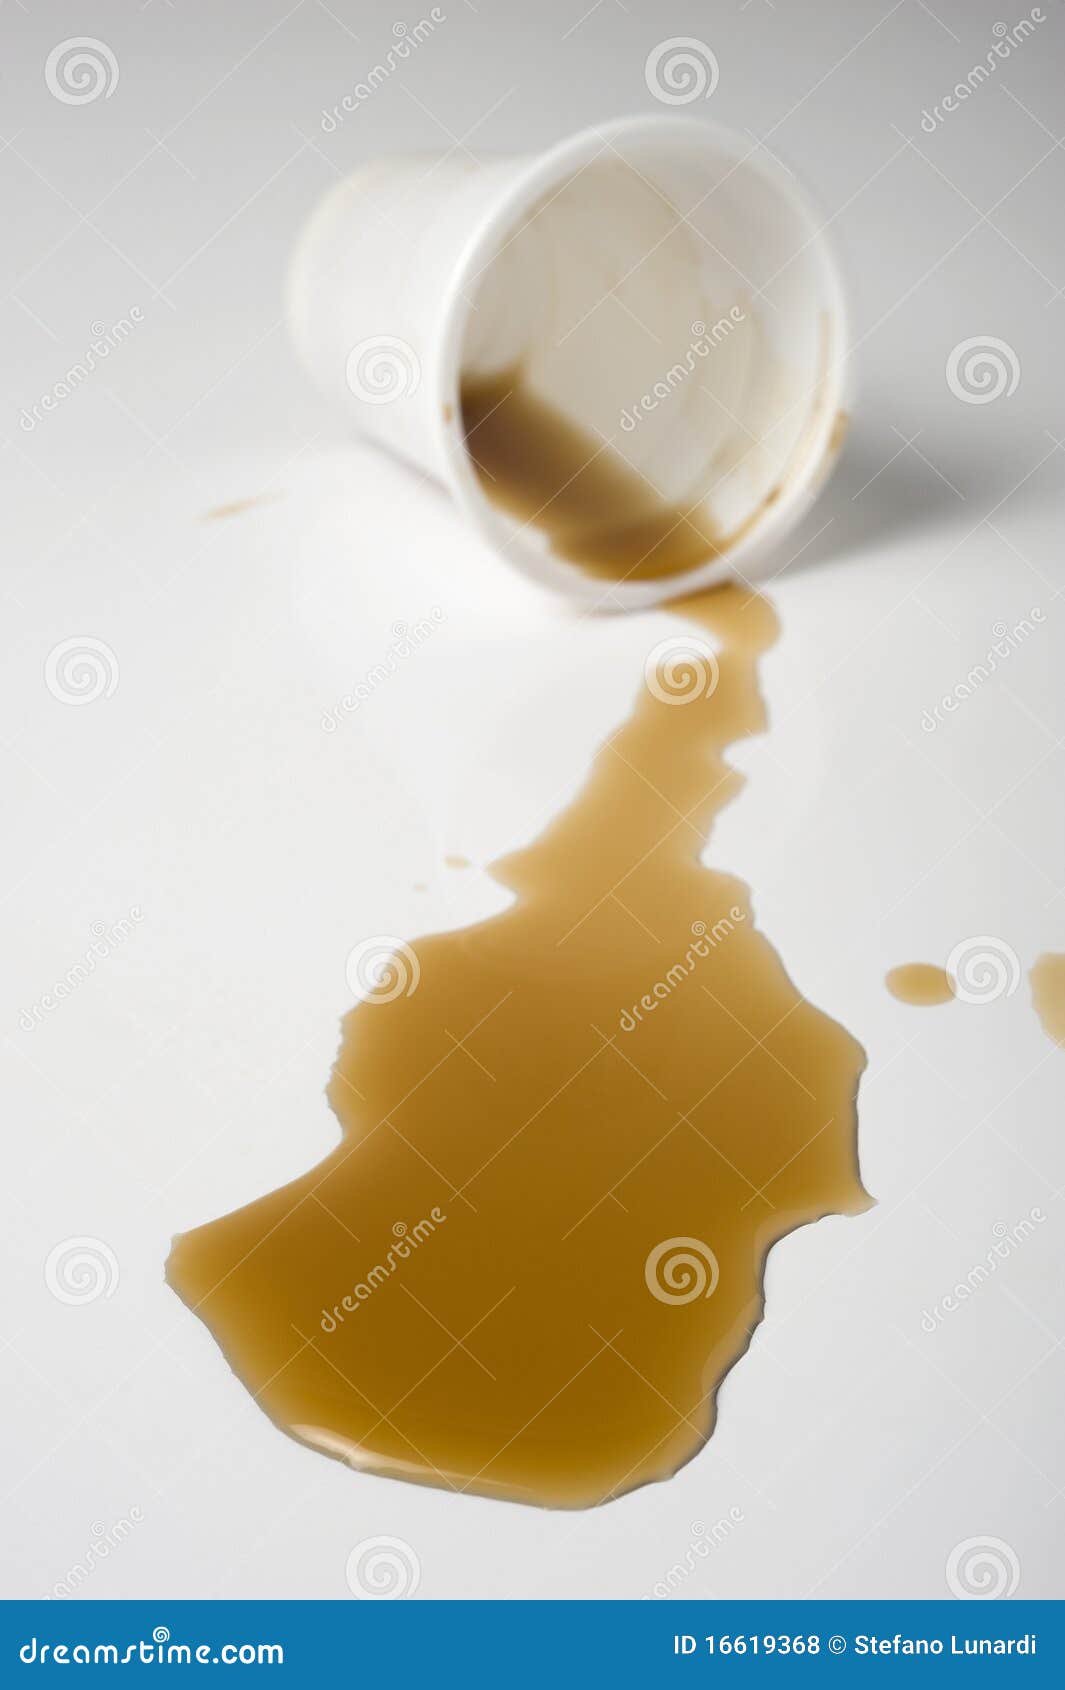 coffee spill clipart - photo #27